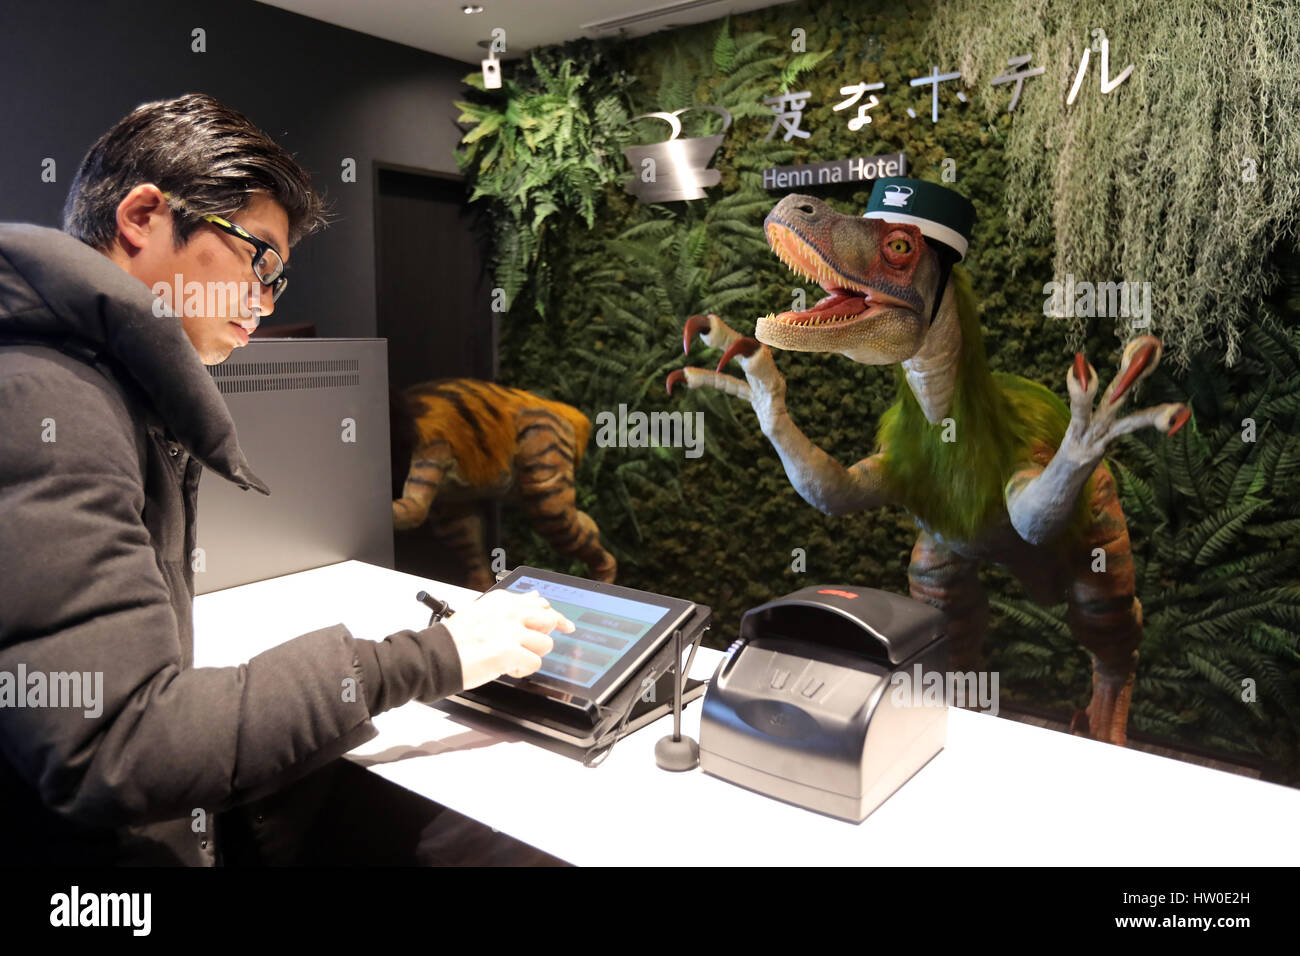 Tokyo, Japan. 15th March 2017. Urayasu, Japan. 15th Mar, 2017. A dinosaur robot greets a guest at a reception of the newly opened 'Henn na Hotel' (Strange hotel) near Tokyo Disney Resort in Urayasu, suburban Tokyo on Wednesday, March 15, 2017. Japan's travel agency H.I.S runs the Henn na Hotel which has only seven human employees while nine types 140 robot staffs work at the 100-room six-storey hotel. Credit: Aflo Co. Ltd./Alamy Live News Stock Photo